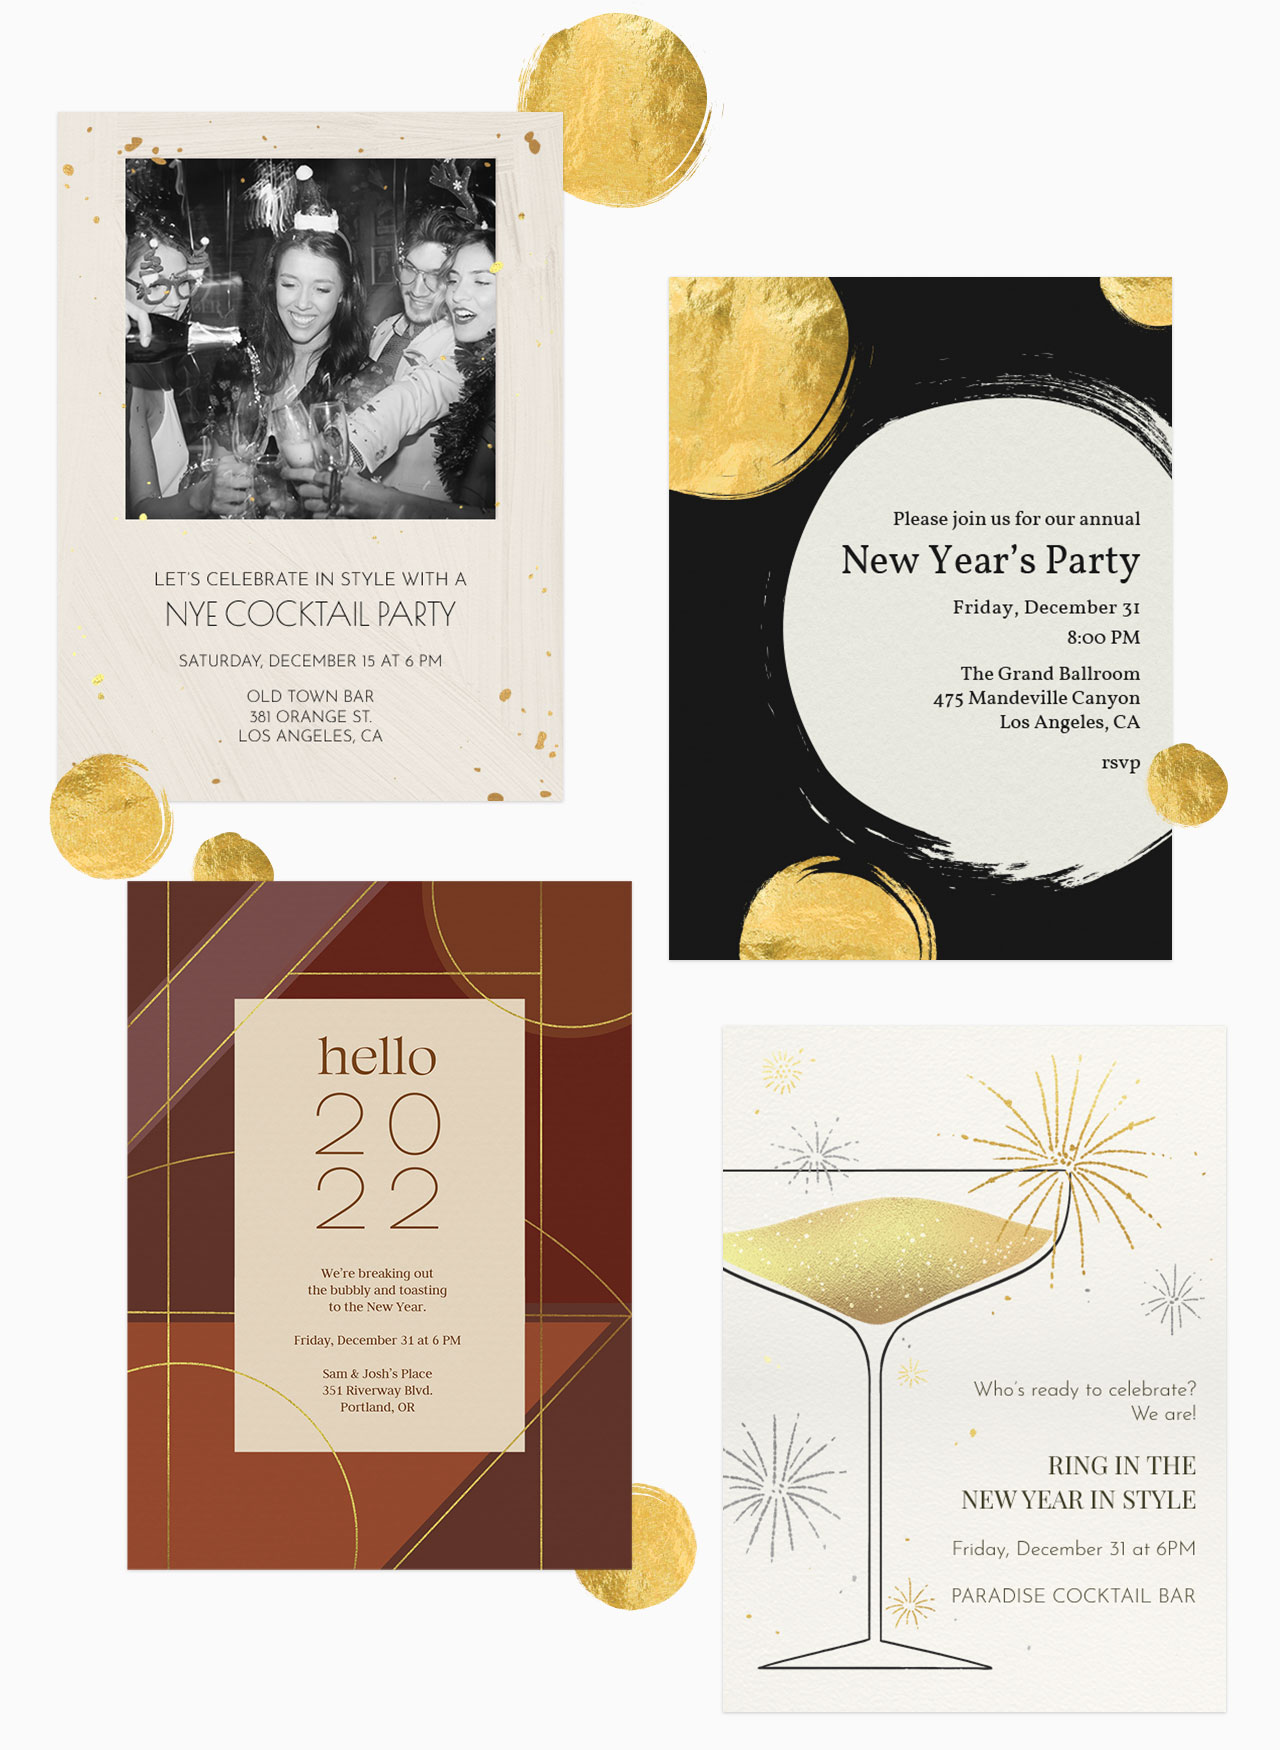 New Year's Eve invitations